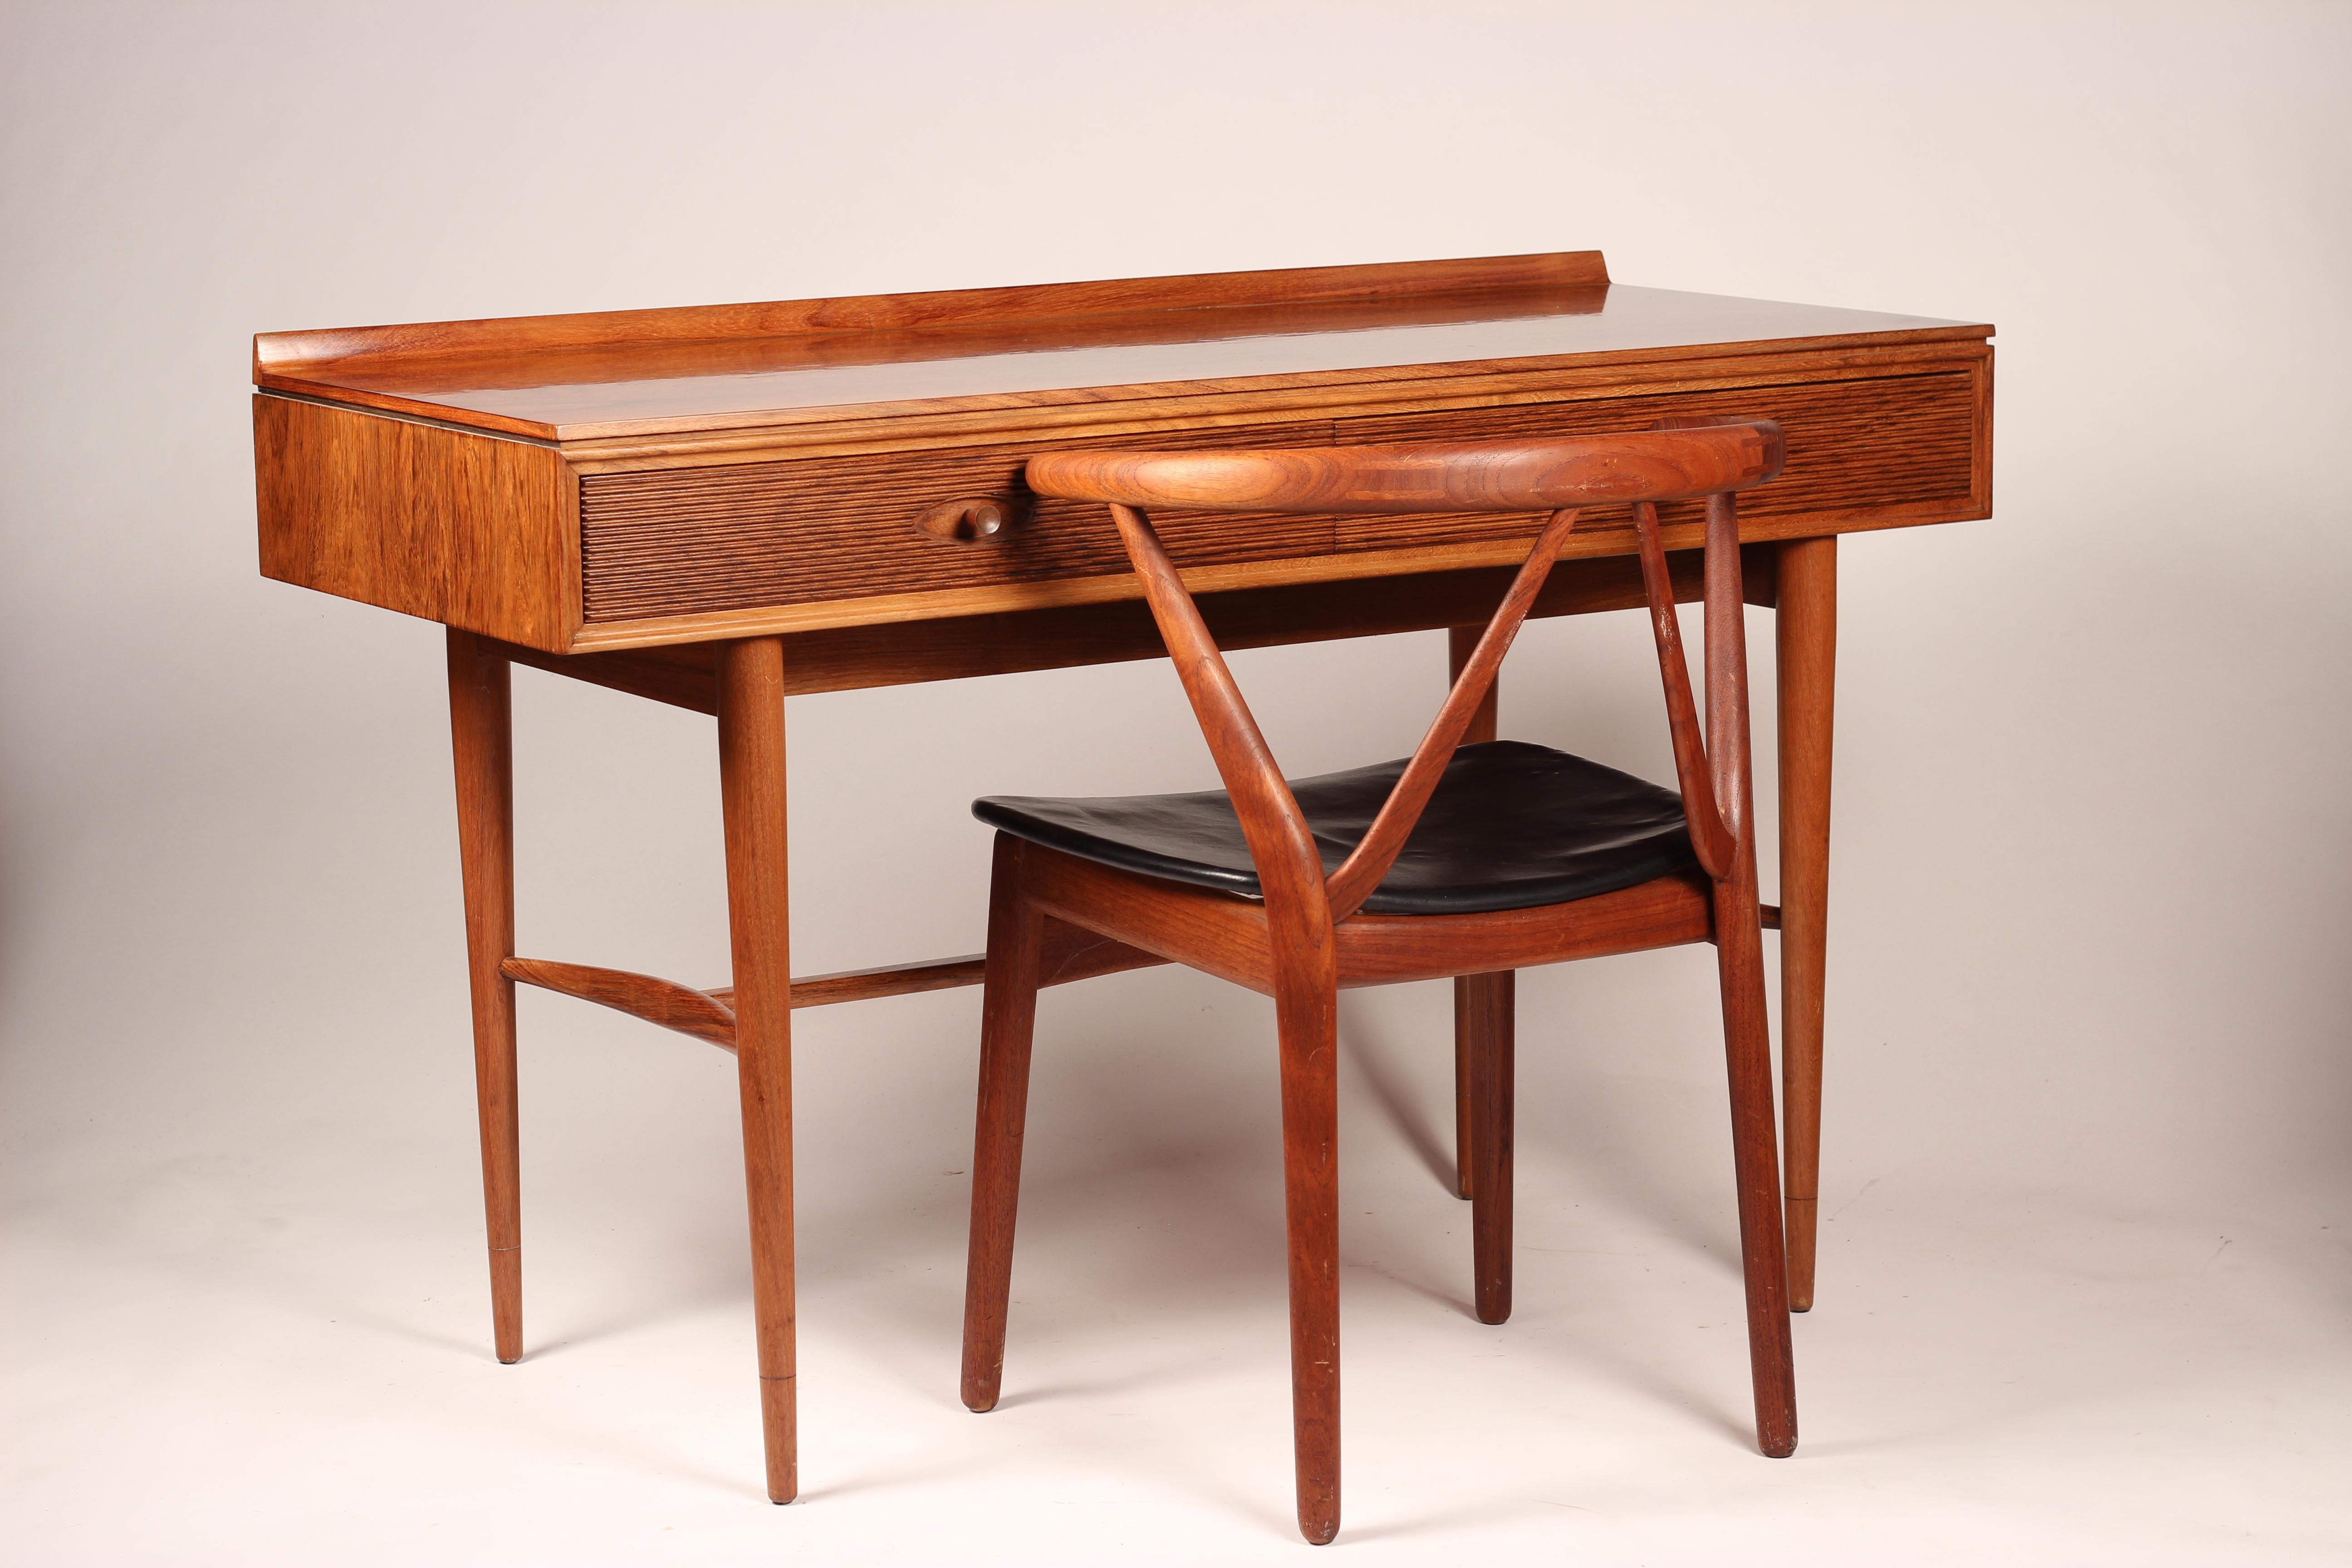 English Mid Century Robert Heritage Desk or Console Table in Rosewood and Teak